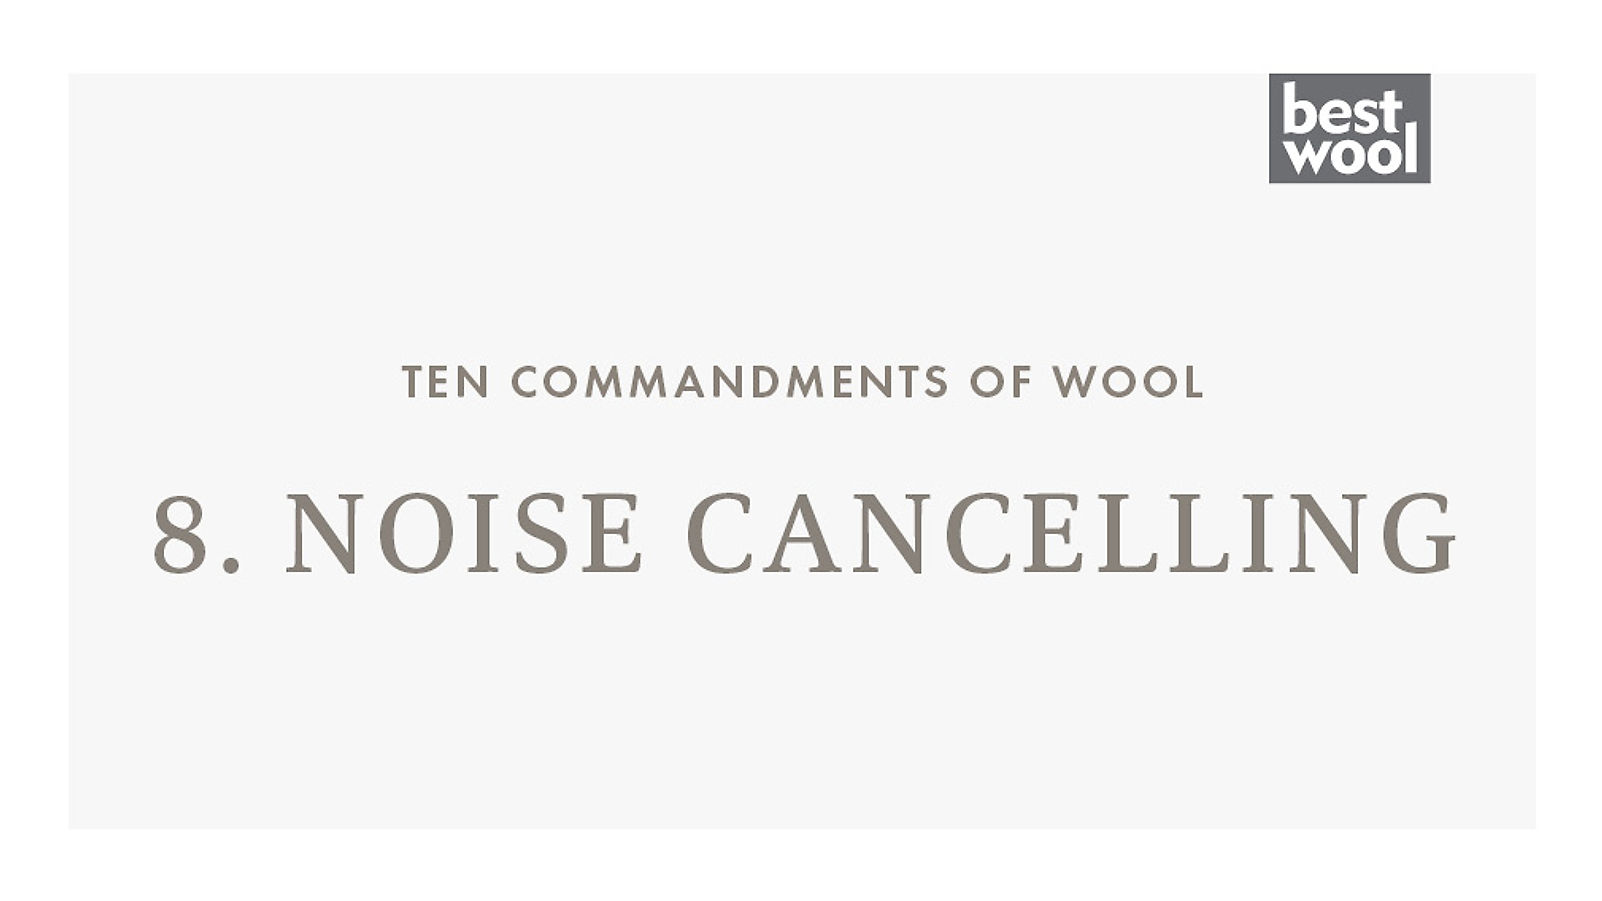 8. Noise Cancelling - Best Wool